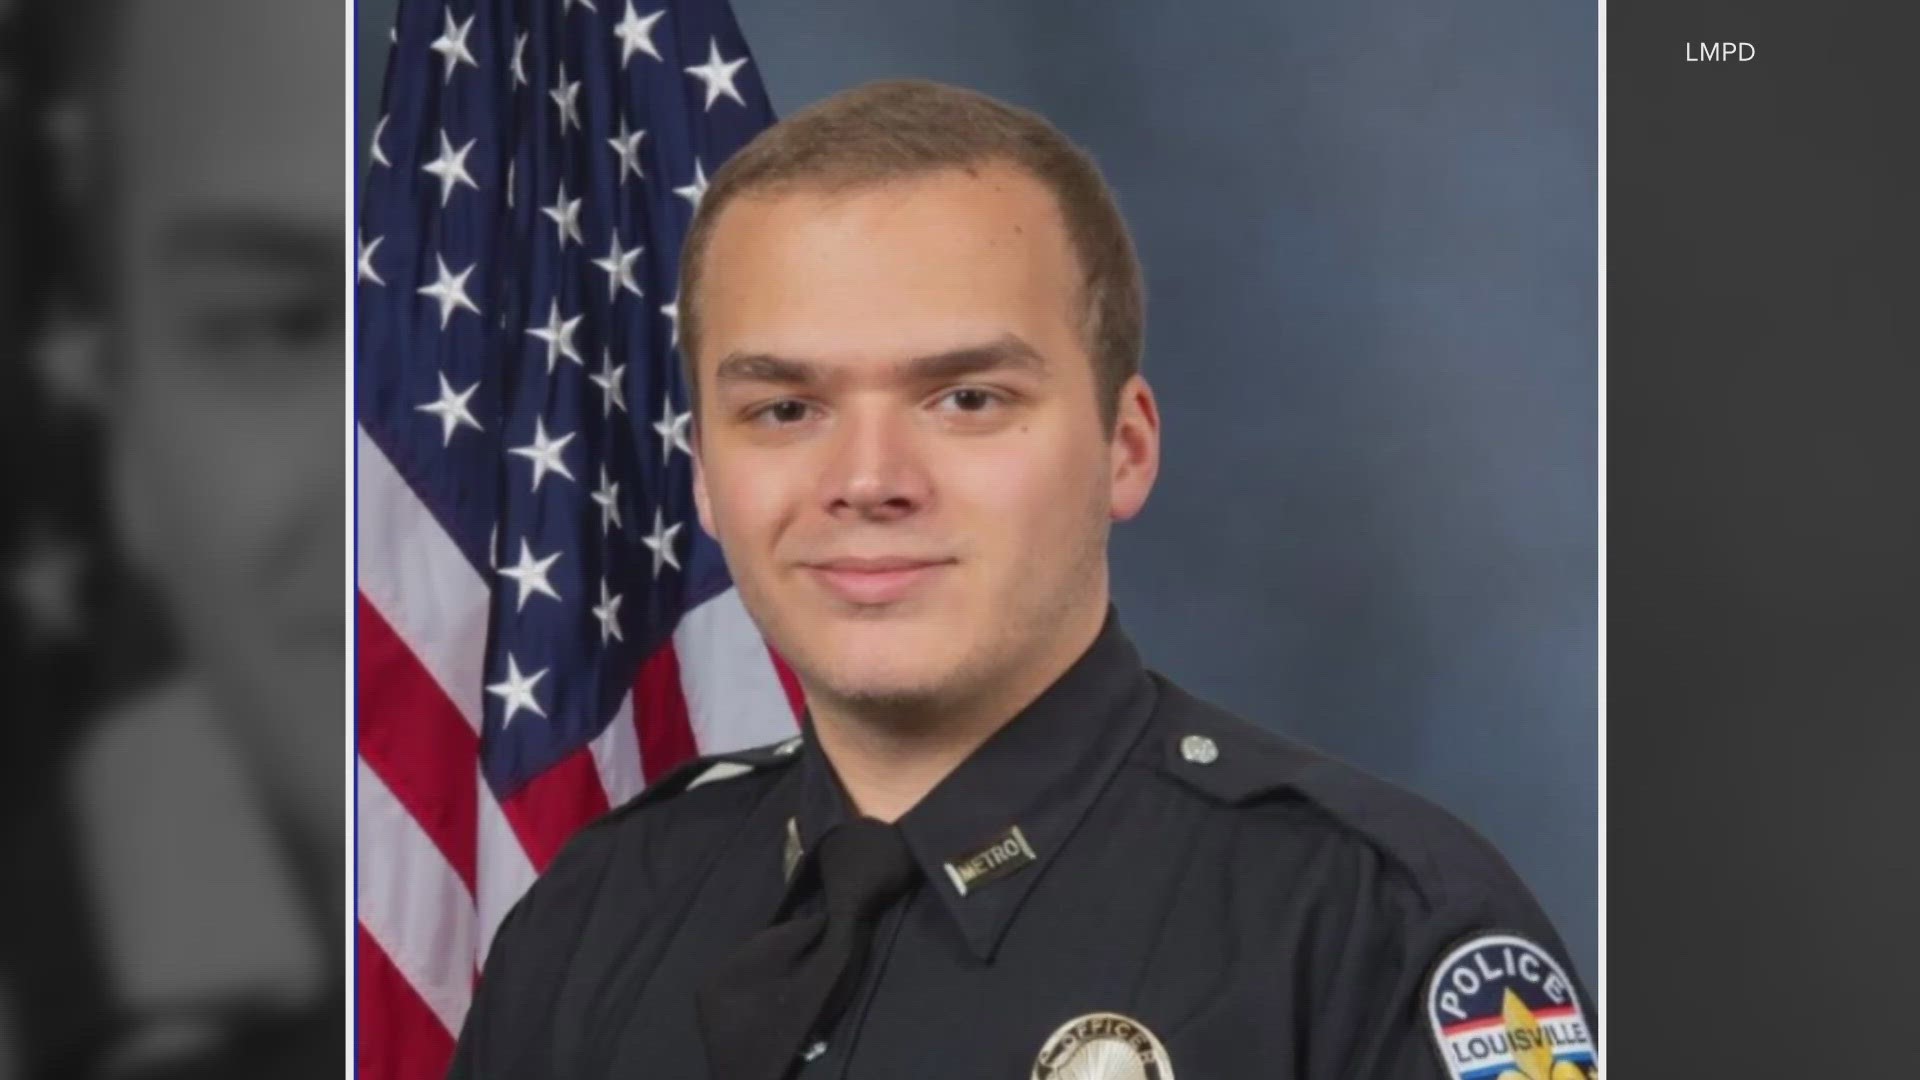 After suffering a critical brain injury, LMPD Ofc. Nickolas Wilt has shown signs of improvement and is "on the right track."